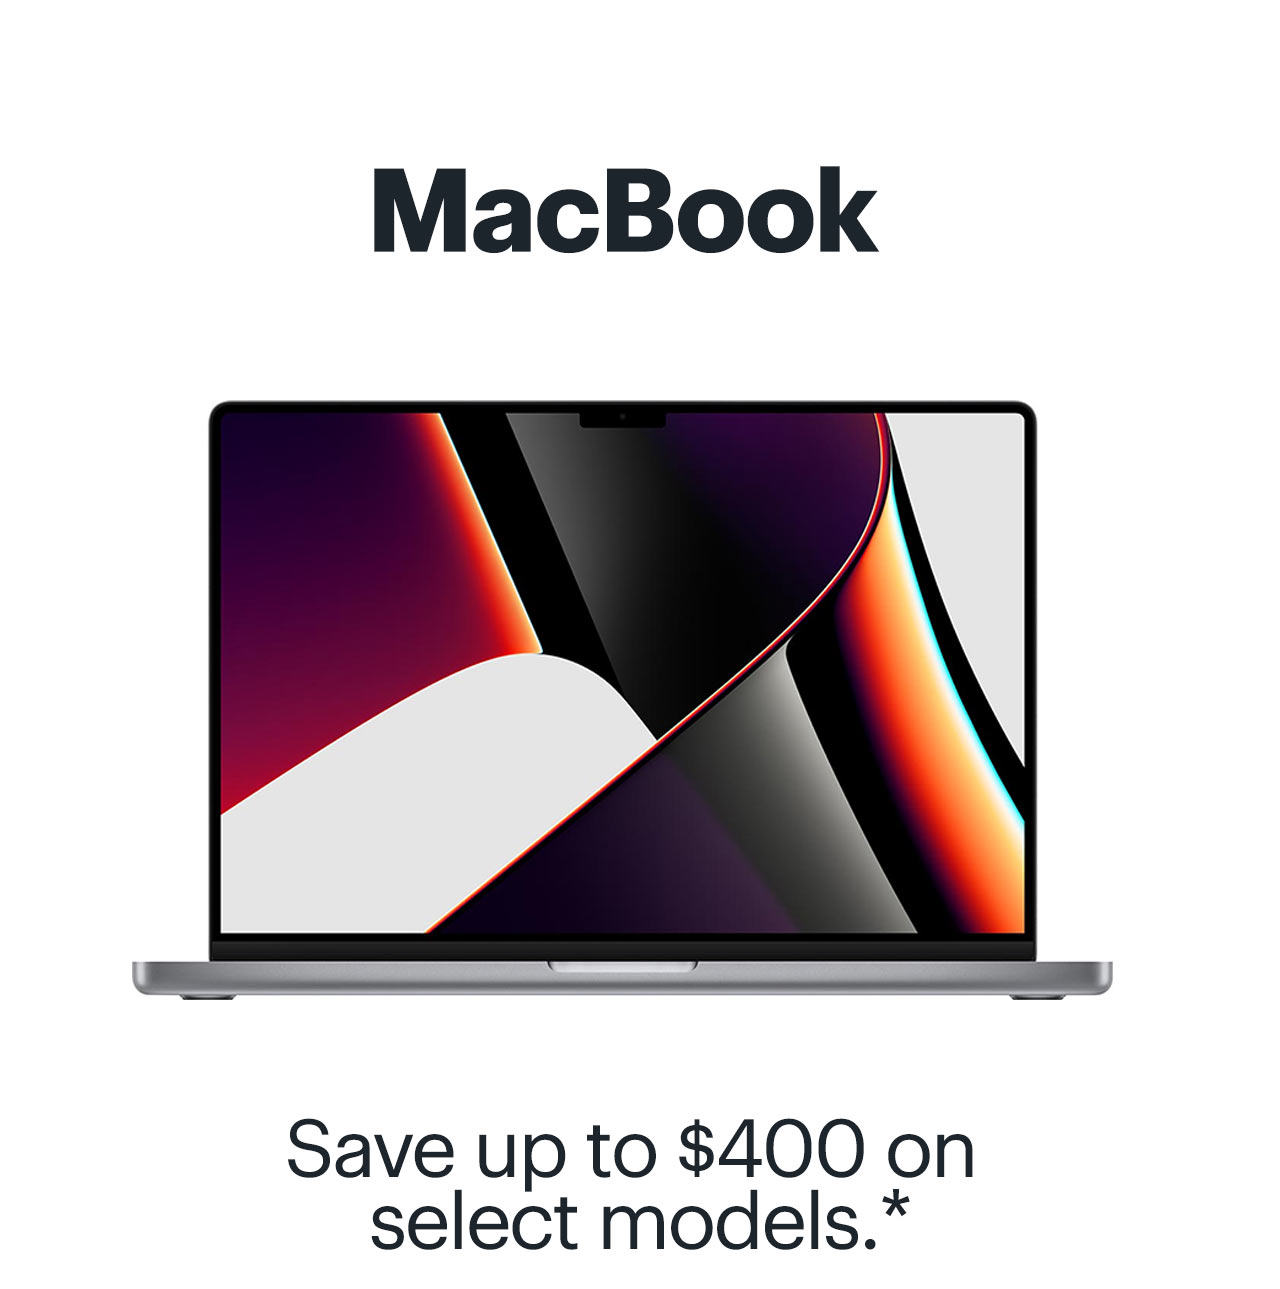 MacBook. Save up to $400 on select models. Reference disclaimer.